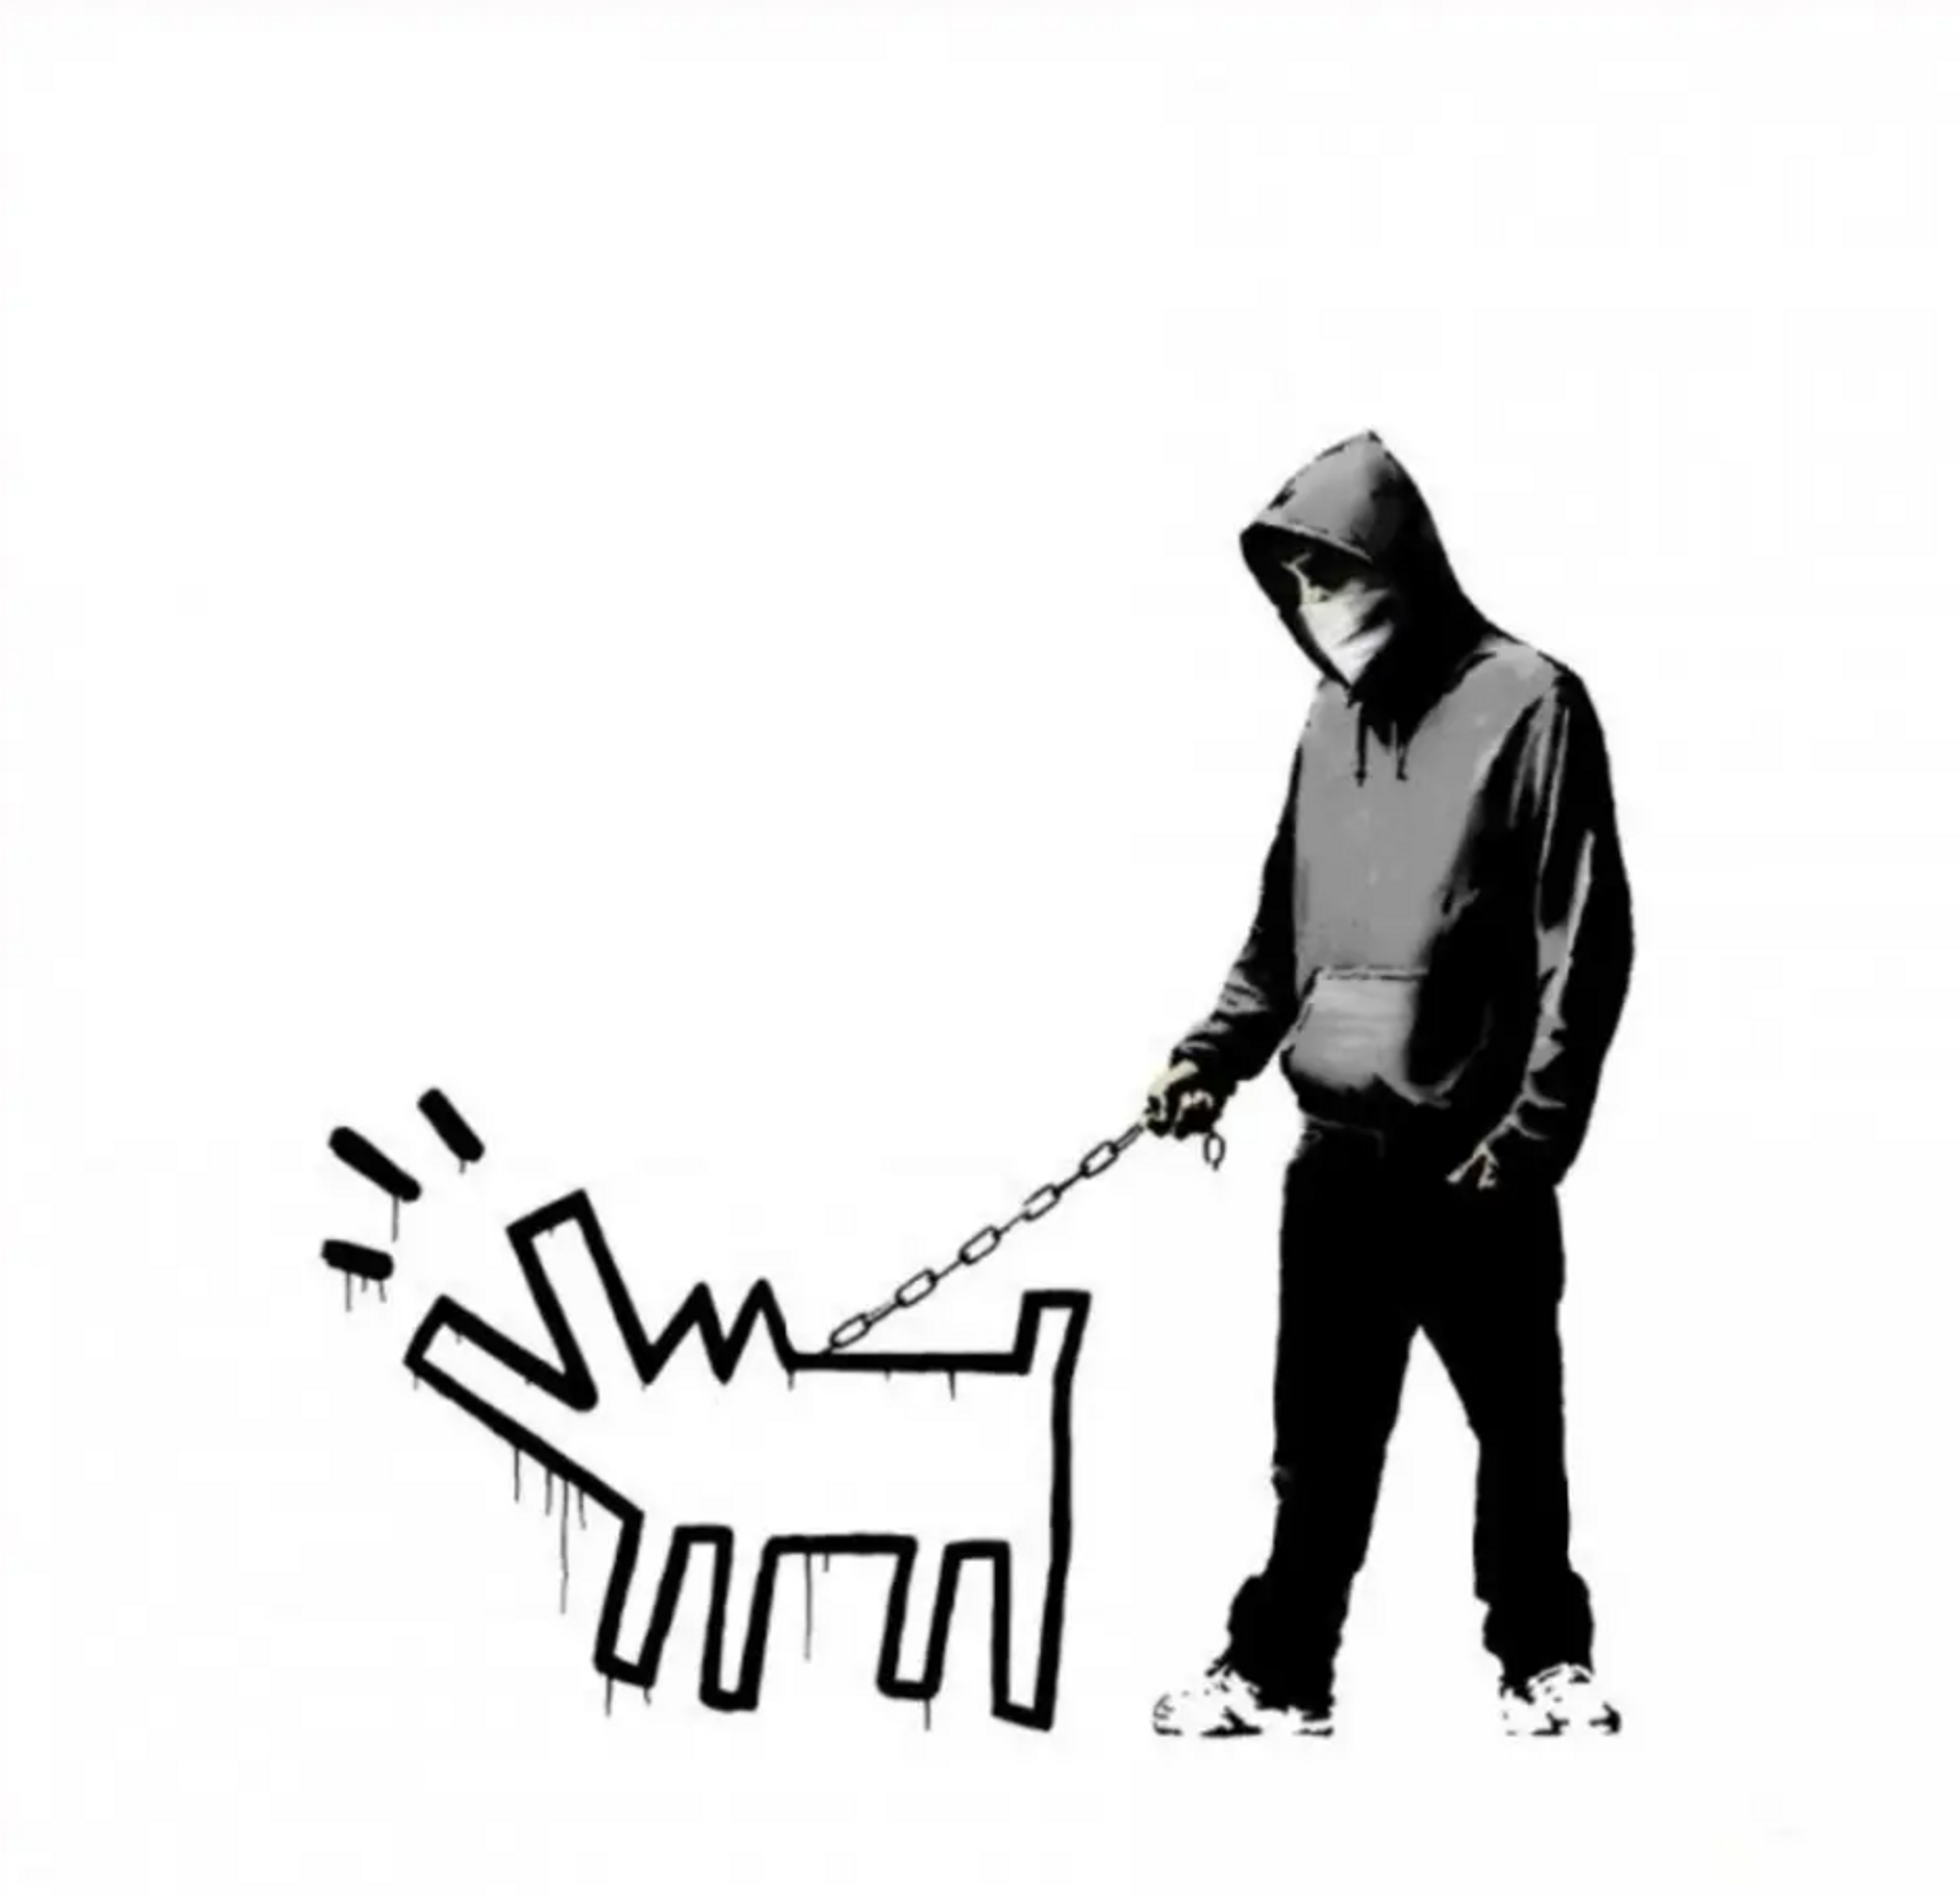 Choose your Weapon by Banksy